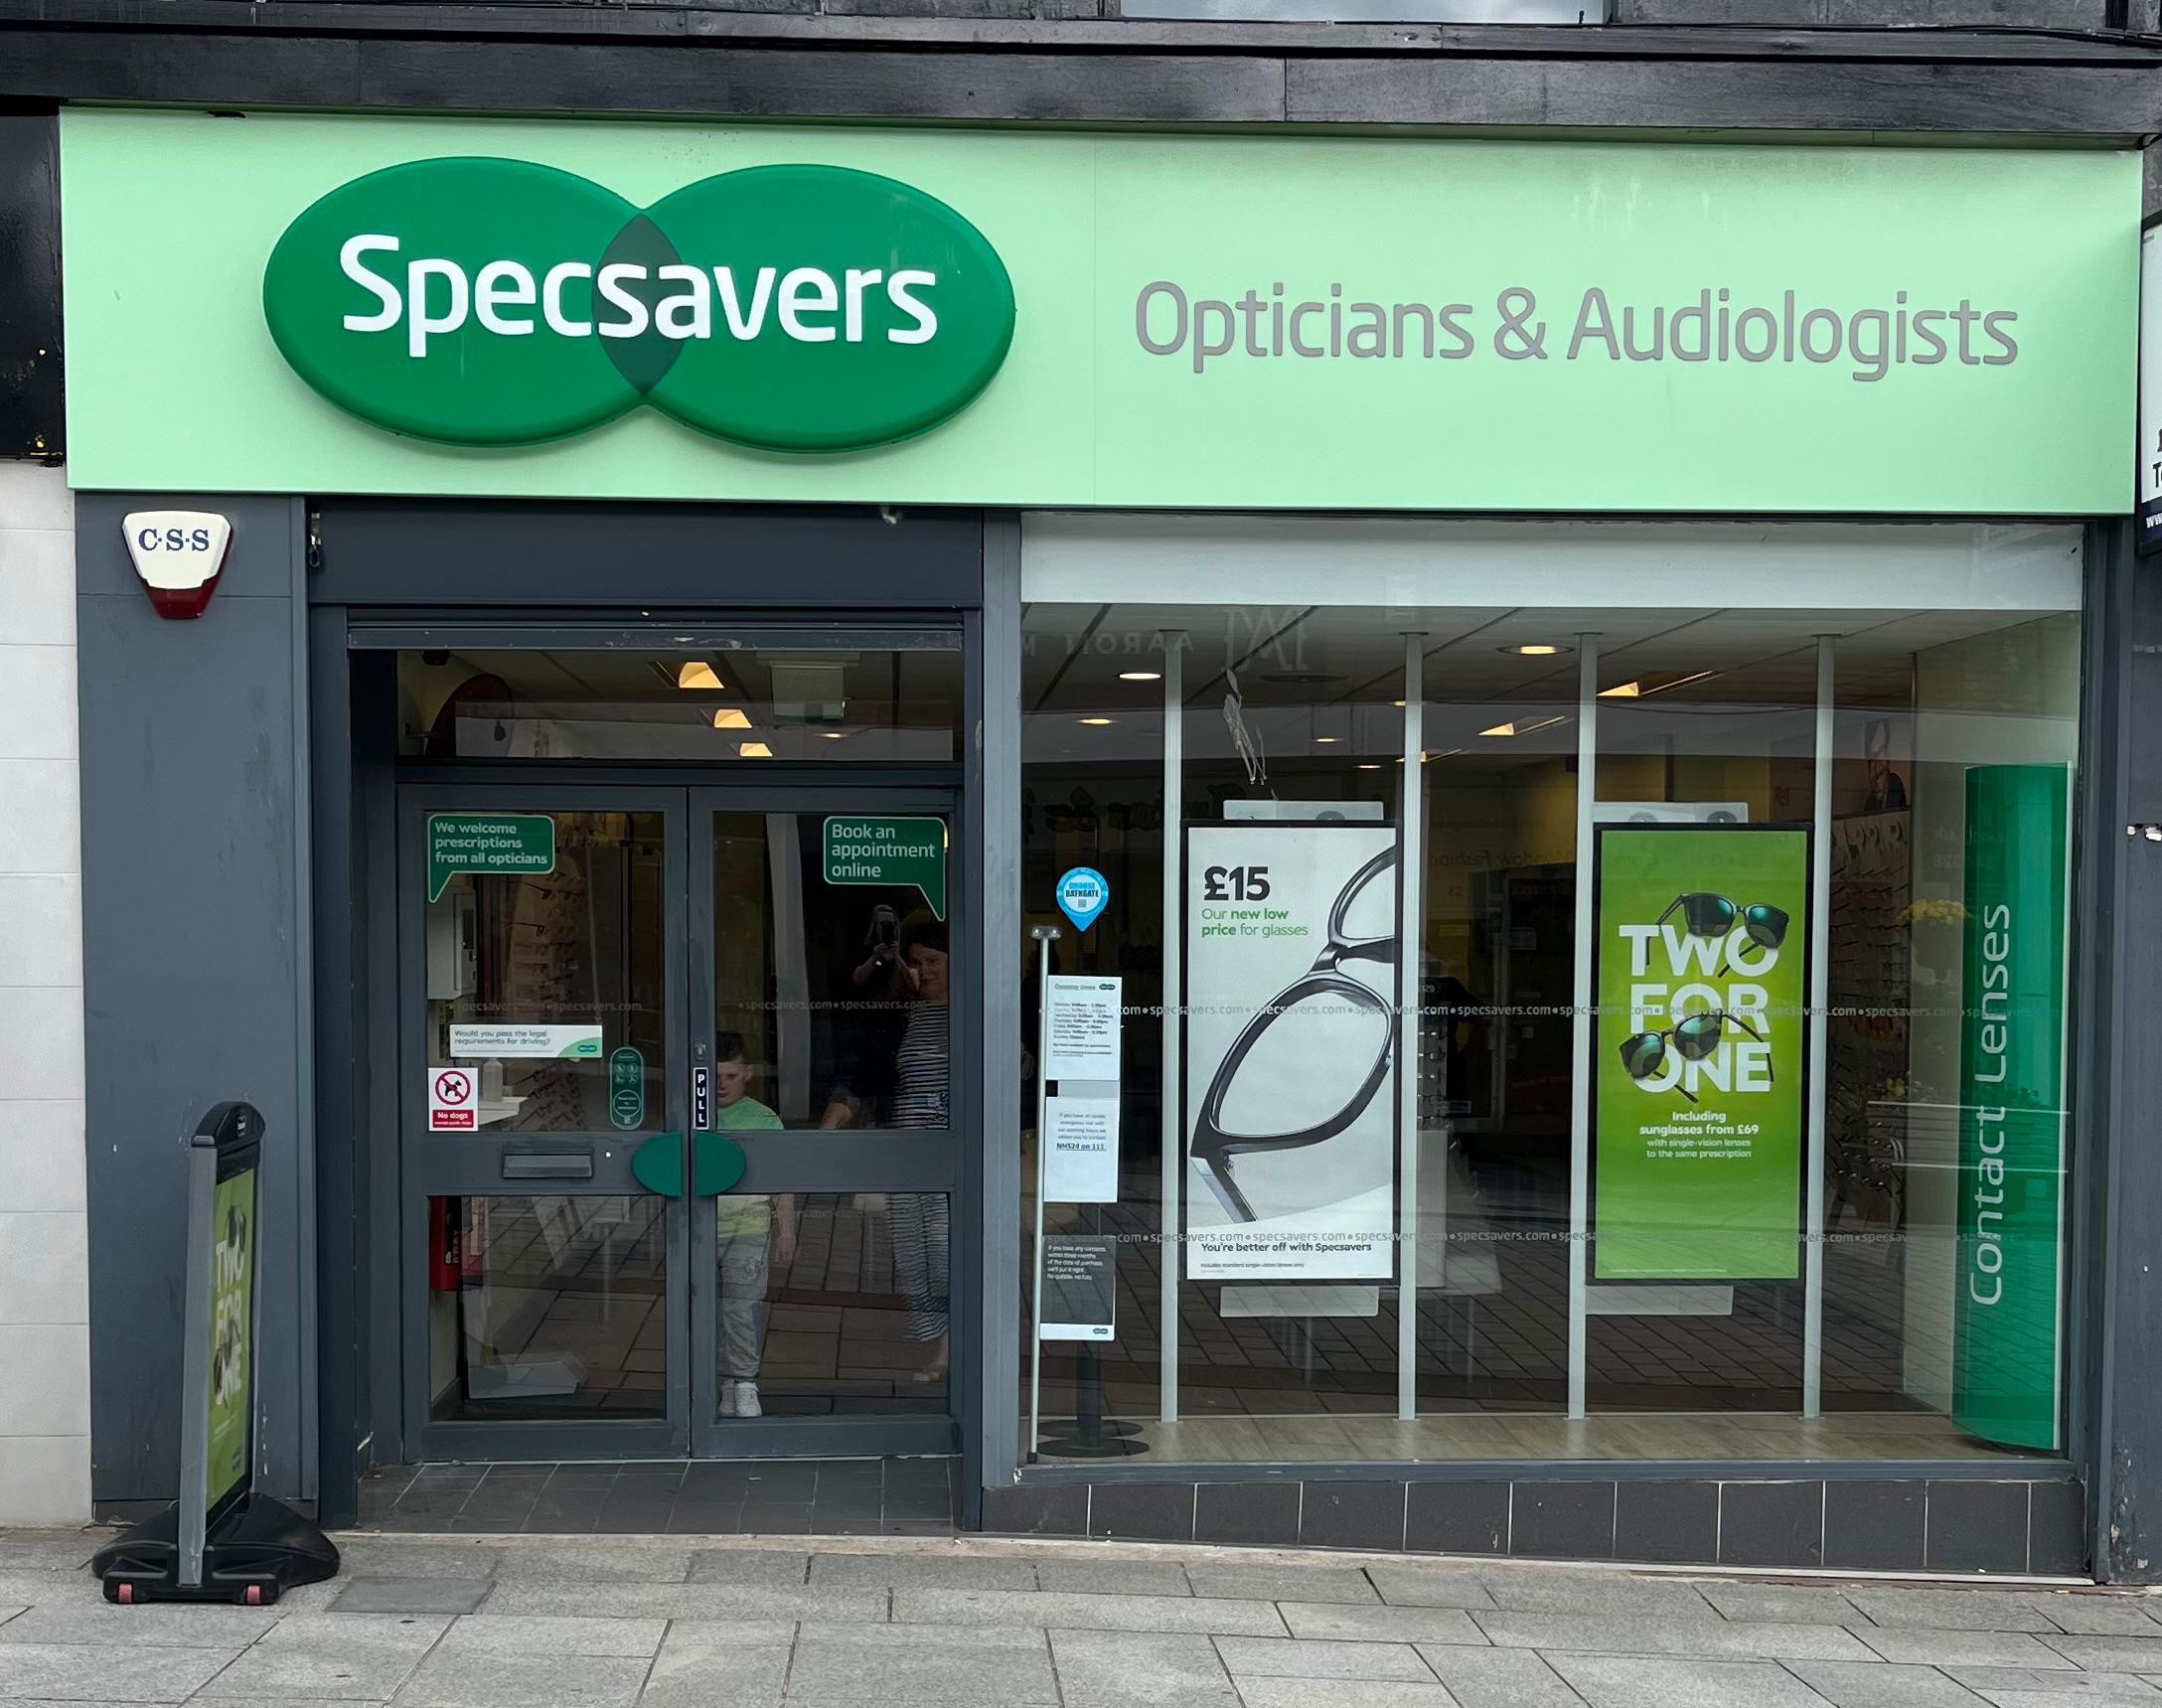 Images Specsavers Opticians and Audiologists - Bathgate